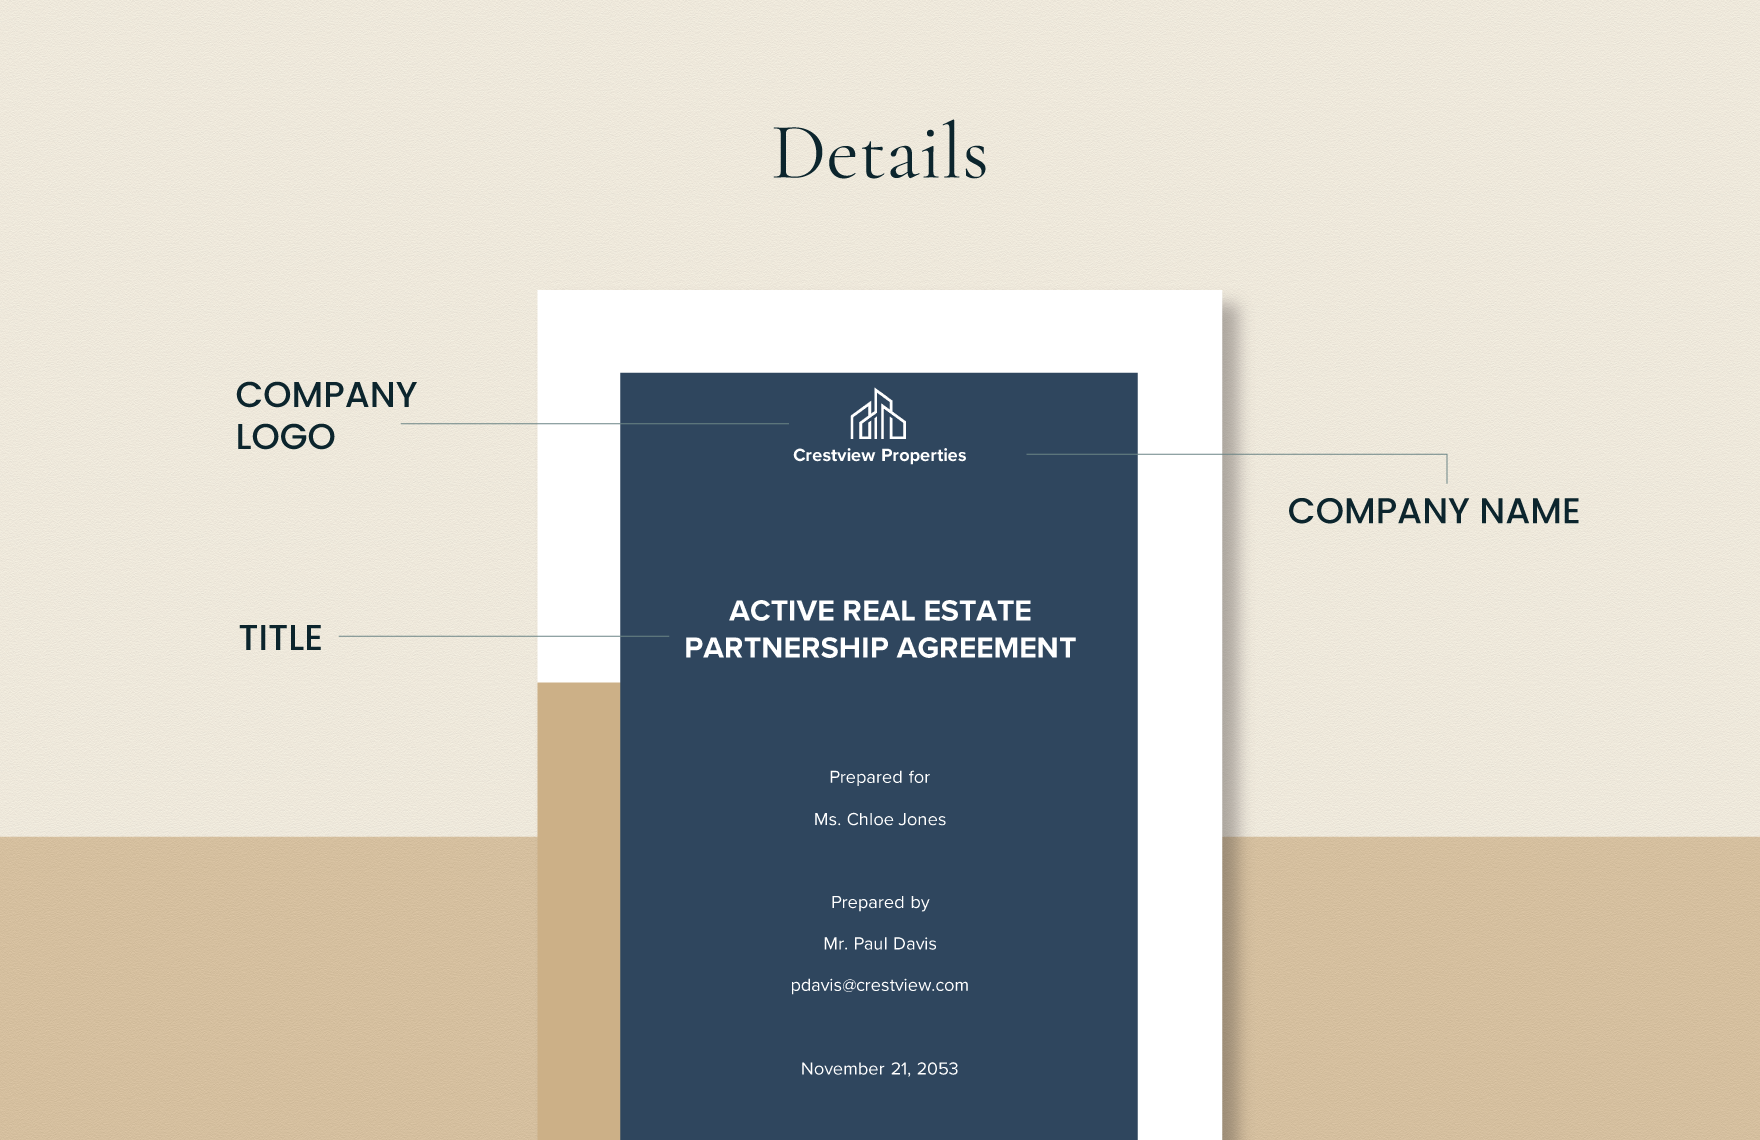 Active Real Estate Partnership Agreement Template